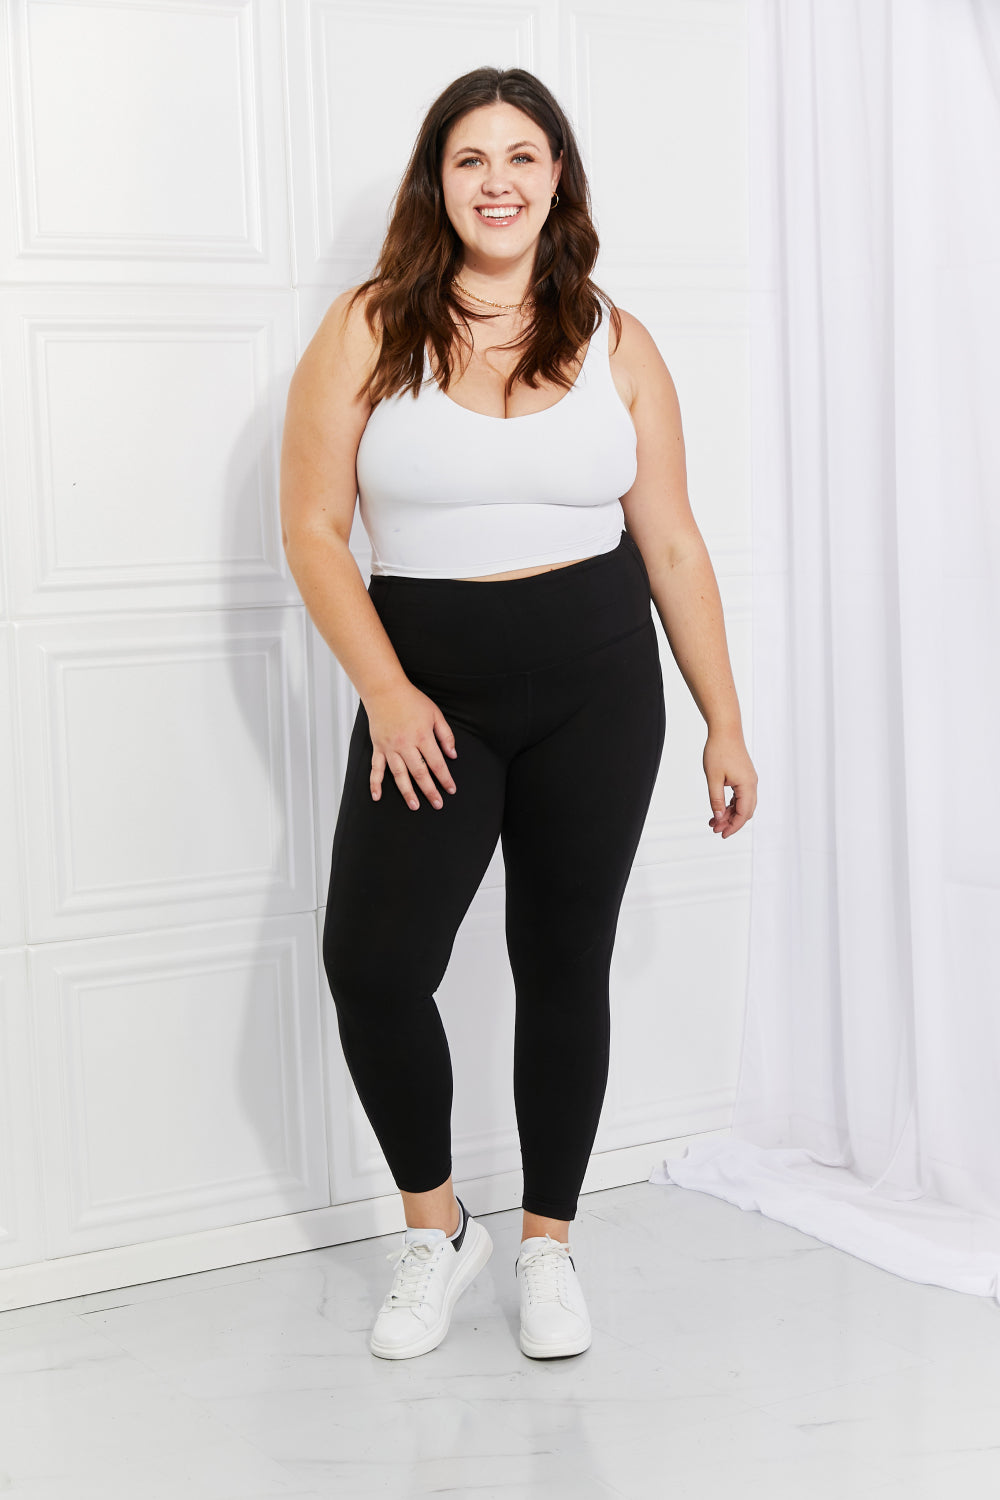 Reflective Dot Leggings with Pockets